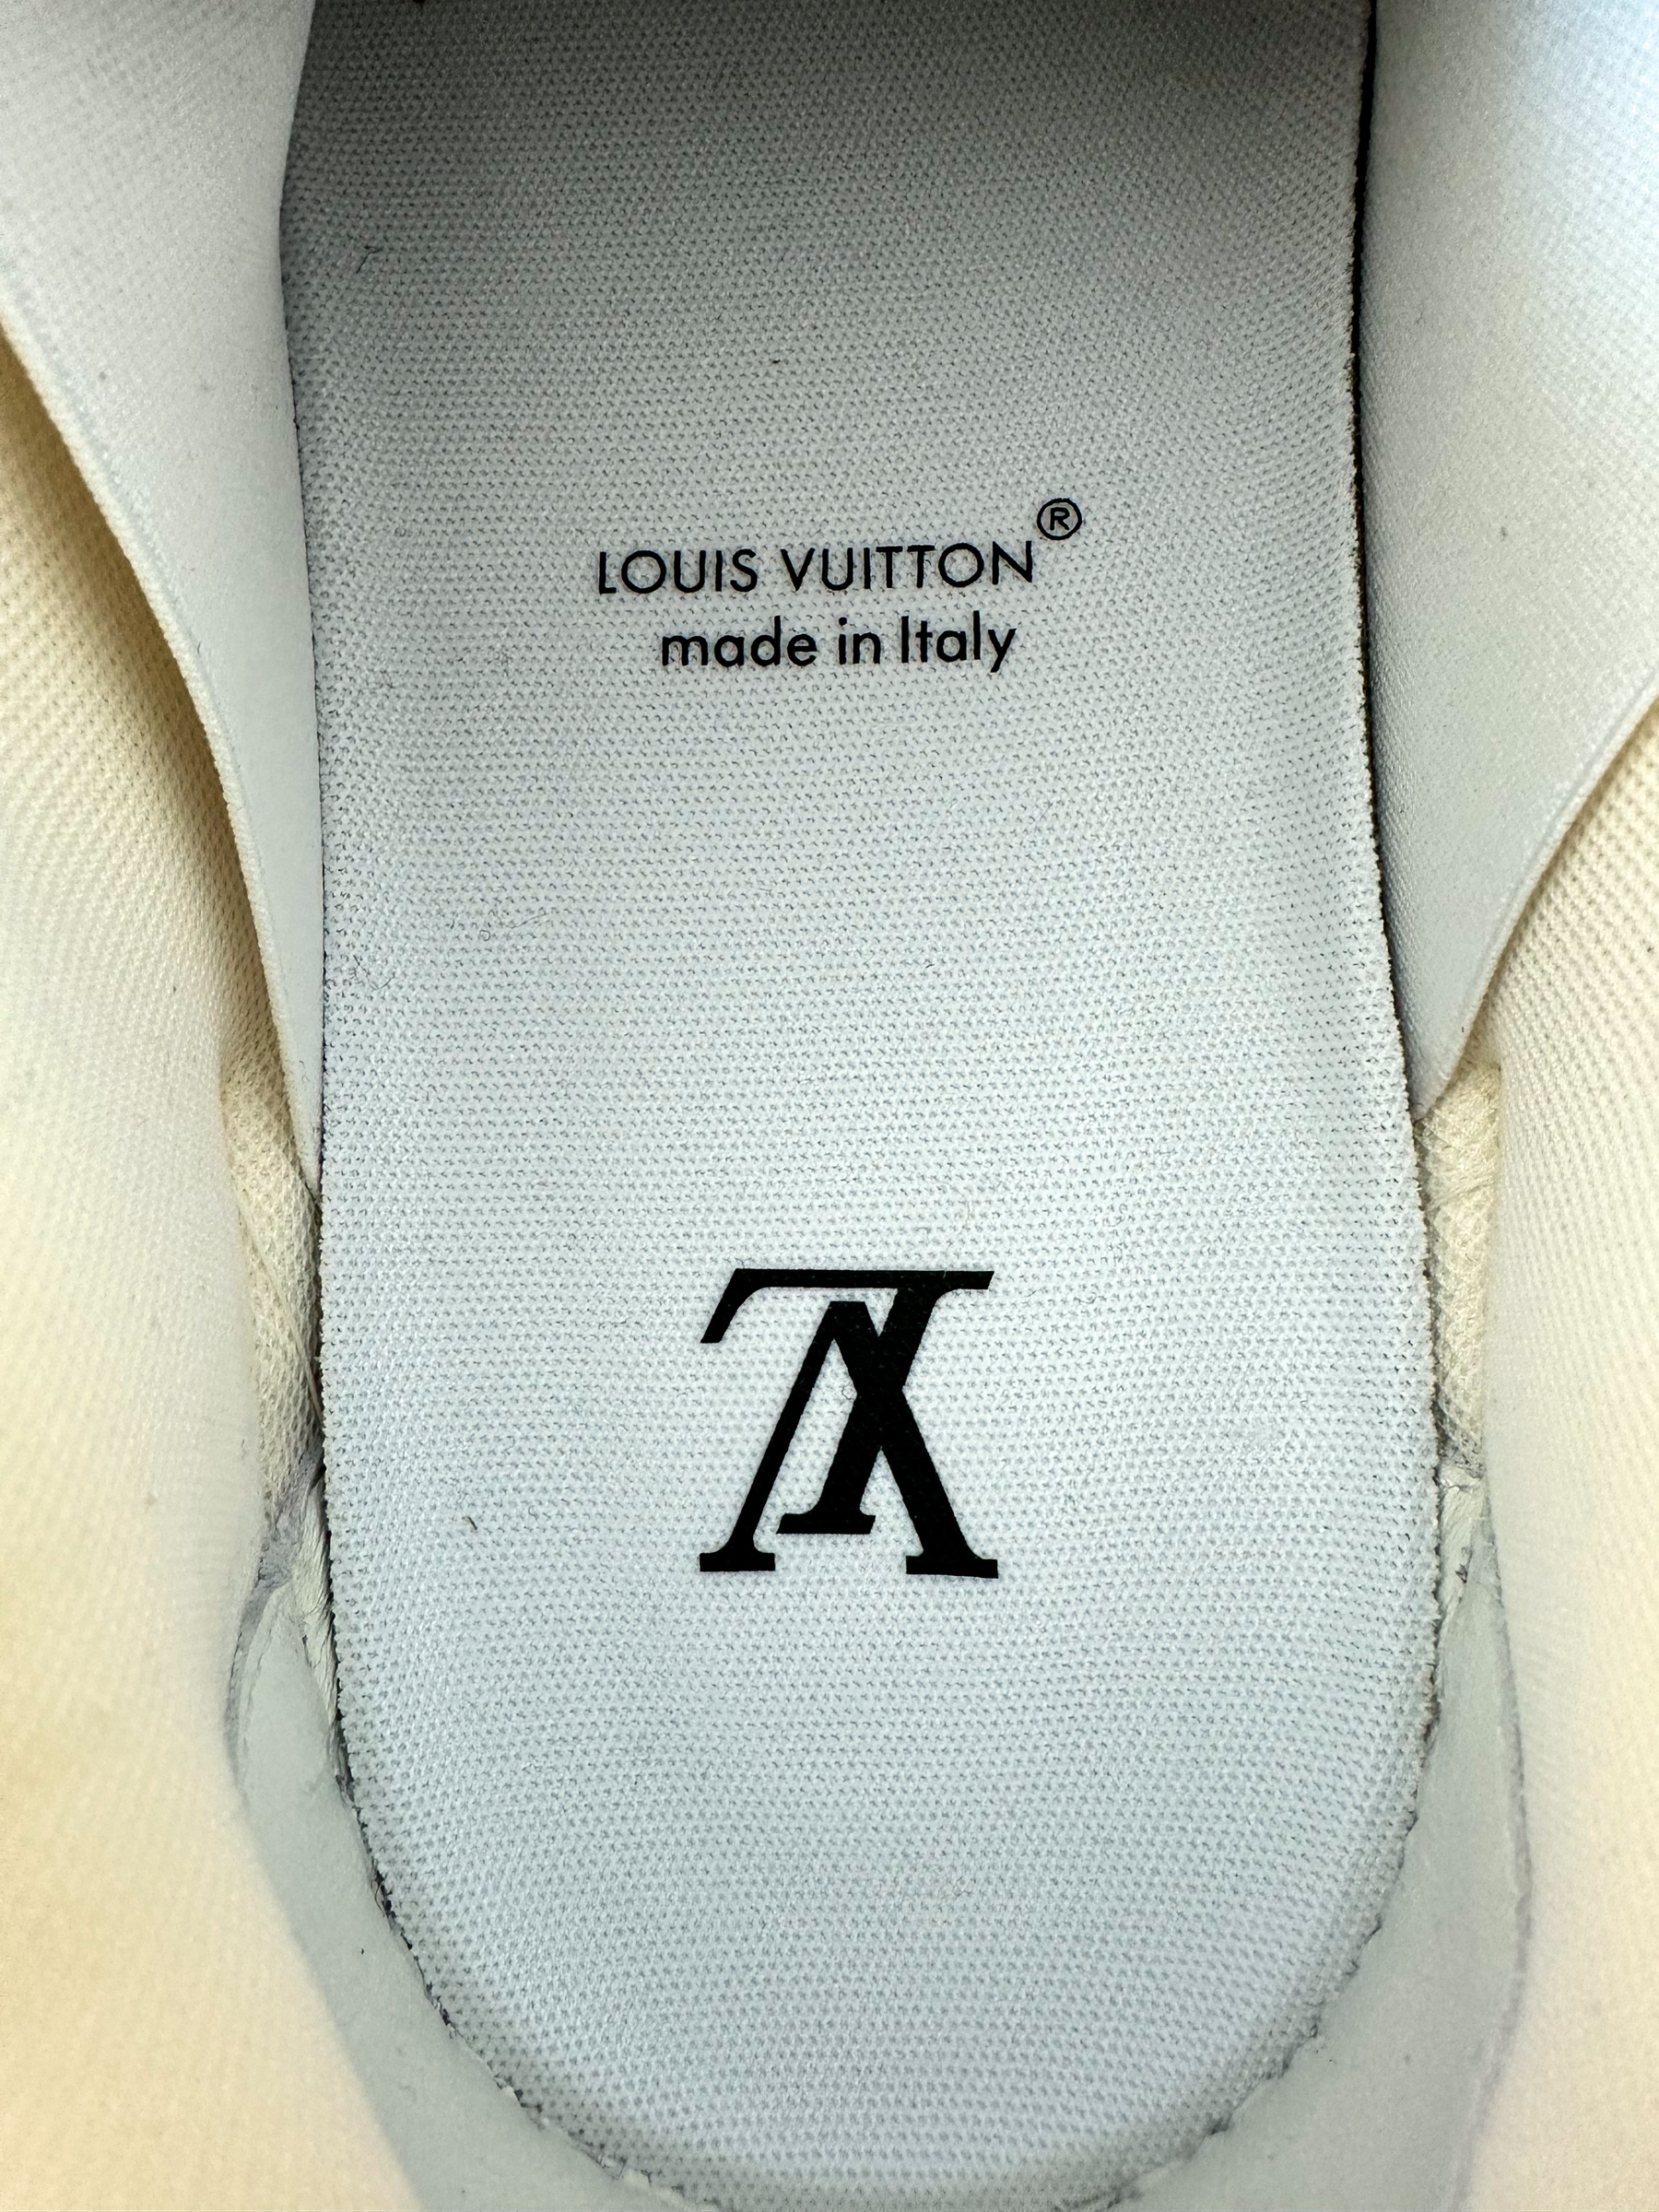 Louis Vuitton Shoes Size 8.5 Made In Italy